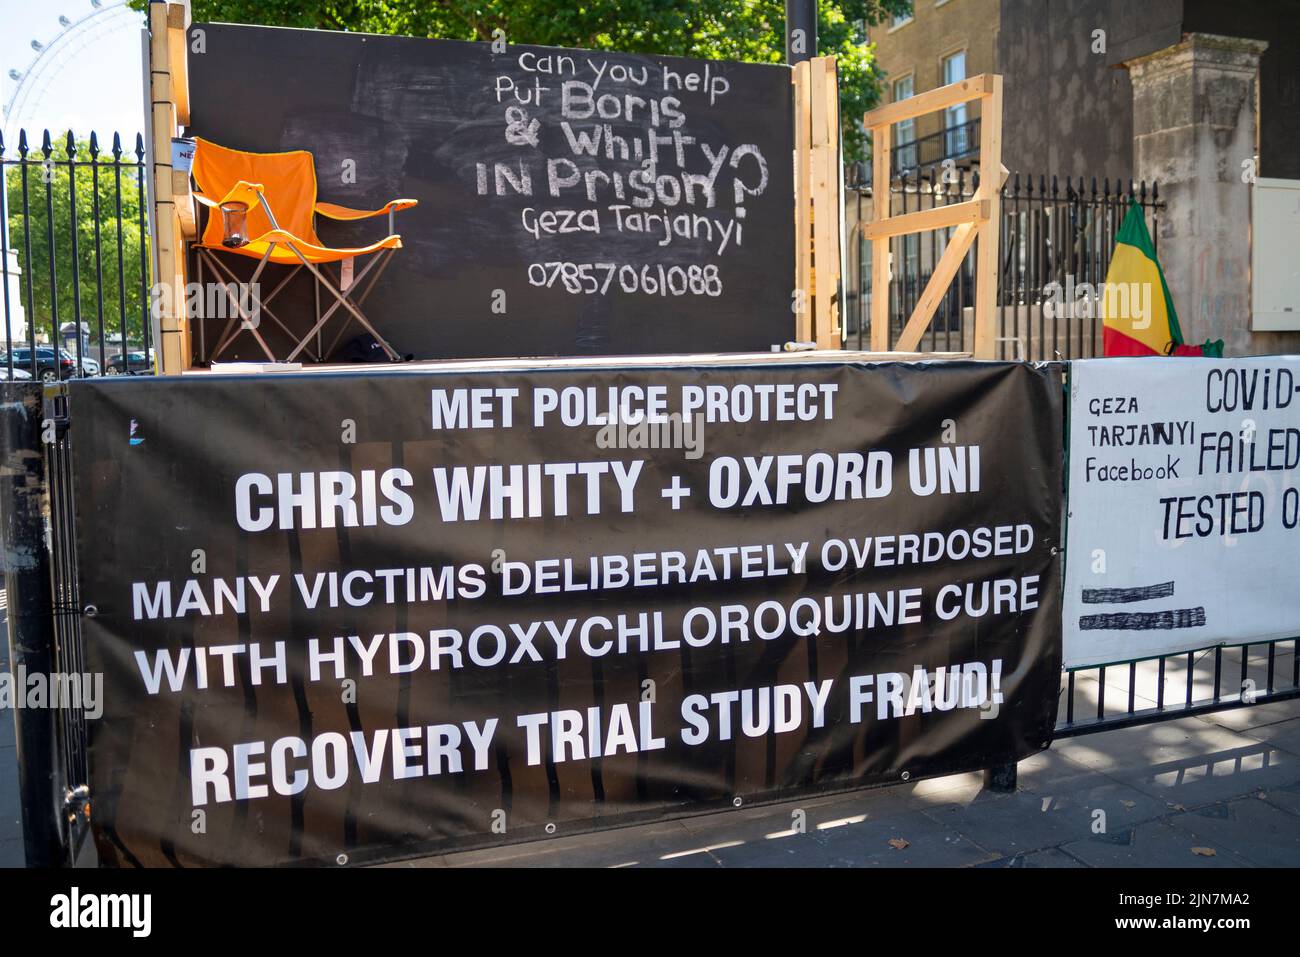 Covid 19 conspiracy theory protest in Whitehall, Westminster, London, UK. Claims Metropolitan Police protect Chris Whitty & Oxford University. Fraud Stock Photo